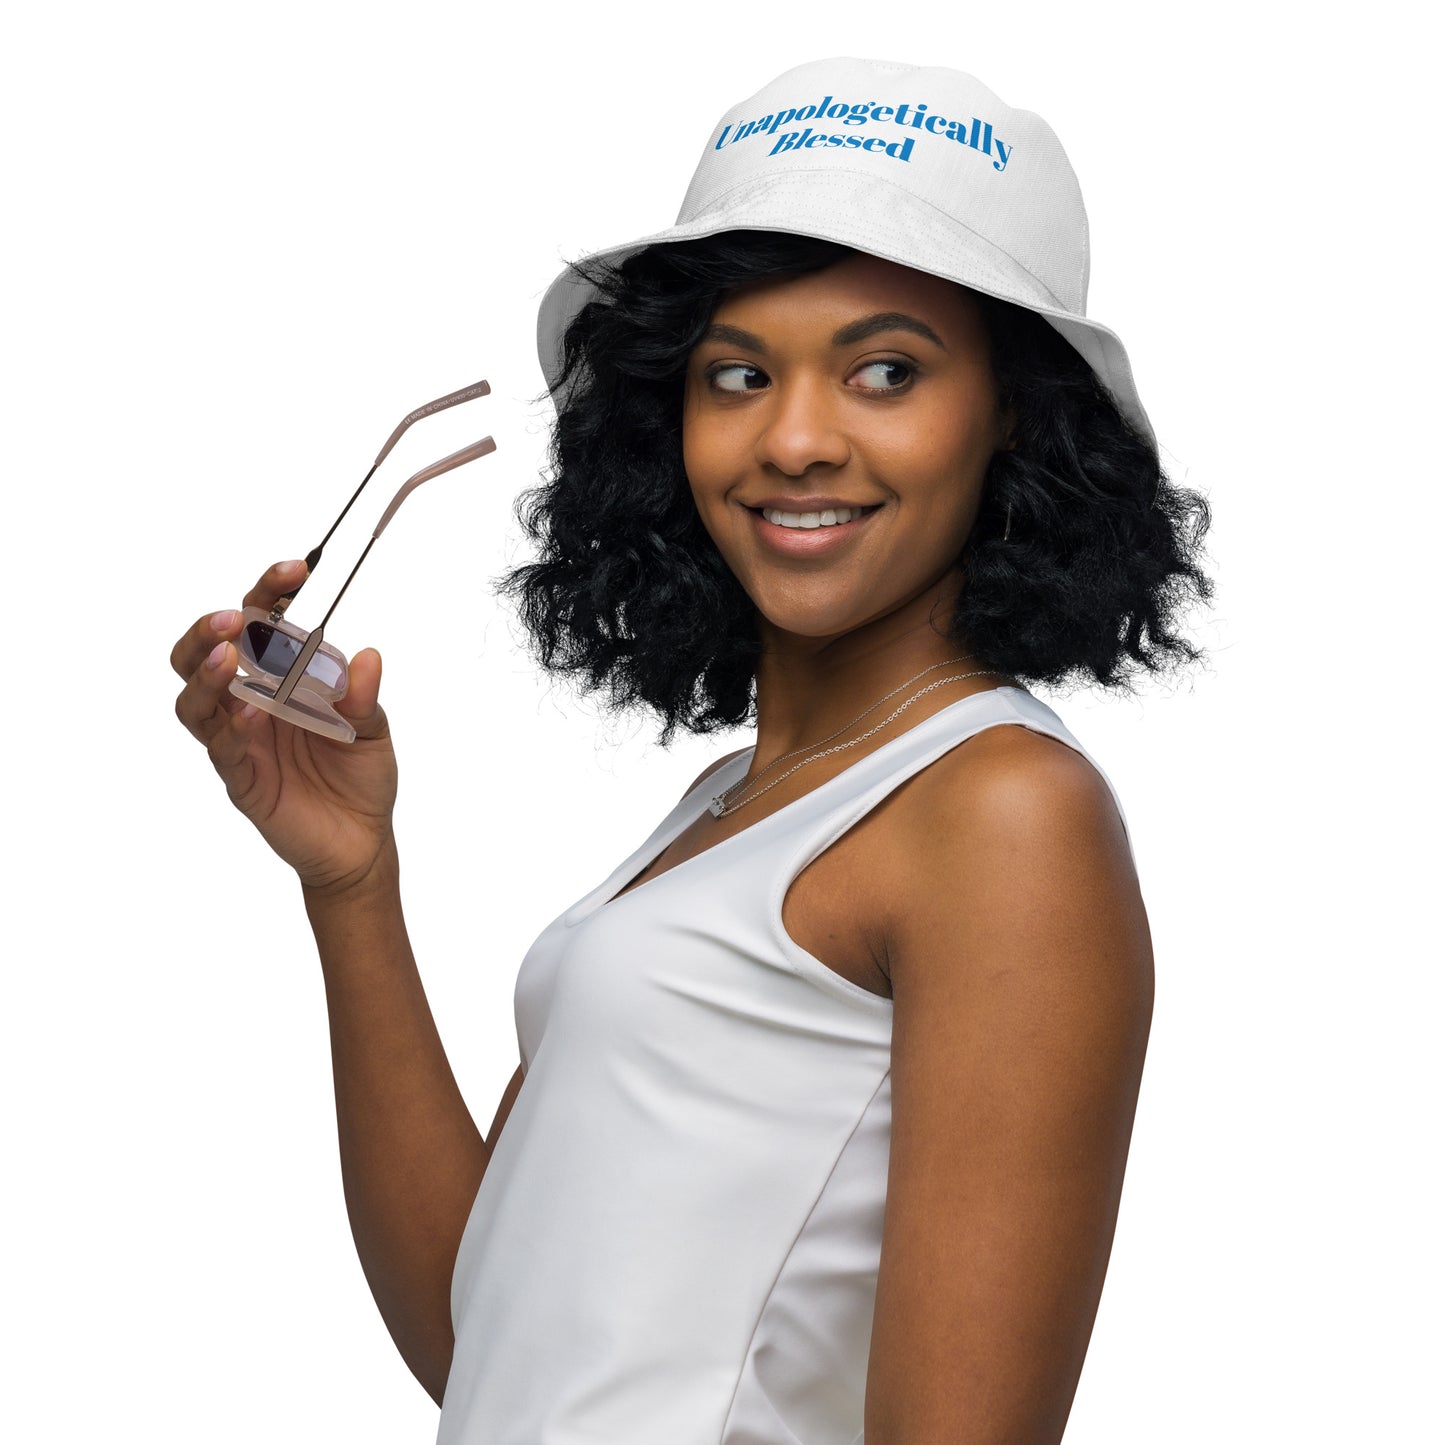 Unapologetically Blessed bucket hat - White/Blue print